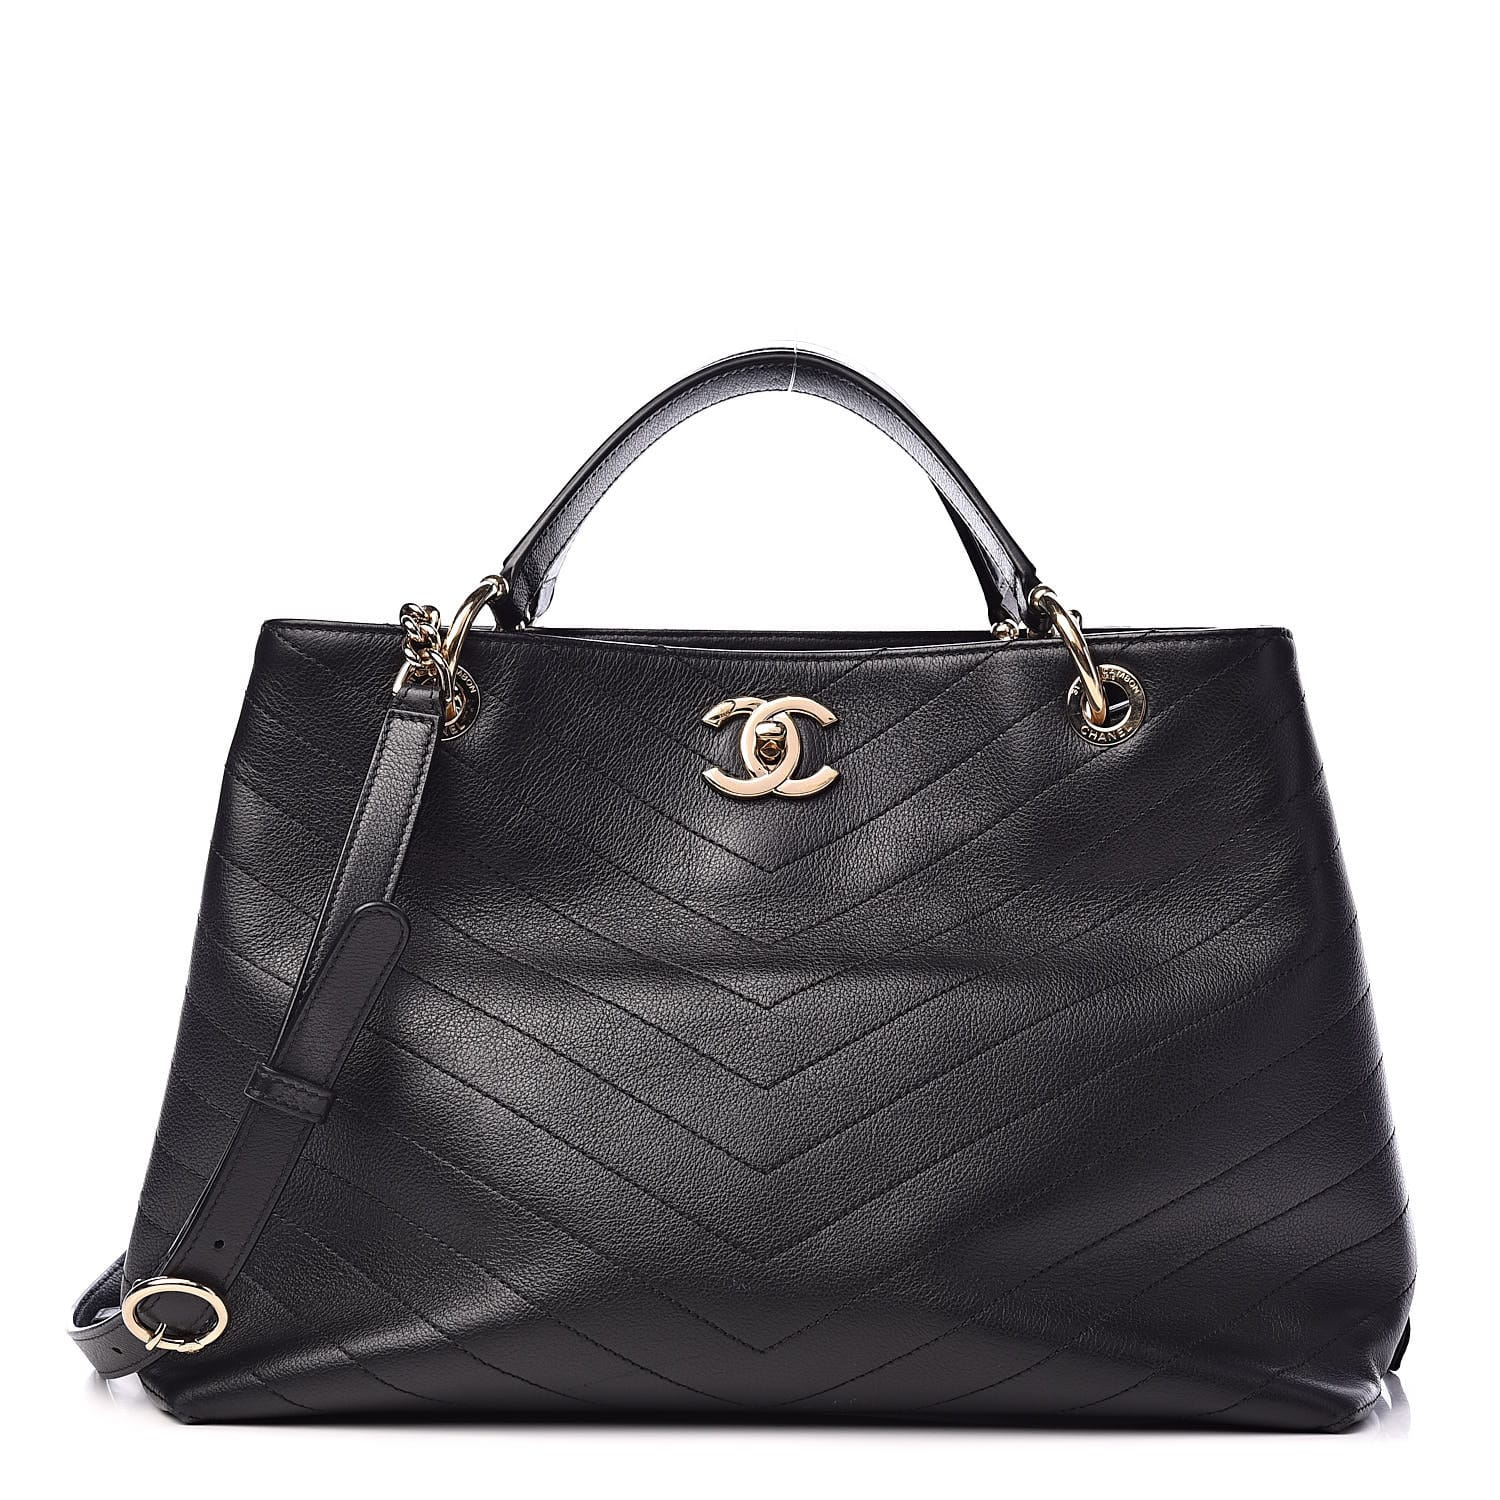 Chanel Totes Case Study: Old versus New - PurseBop